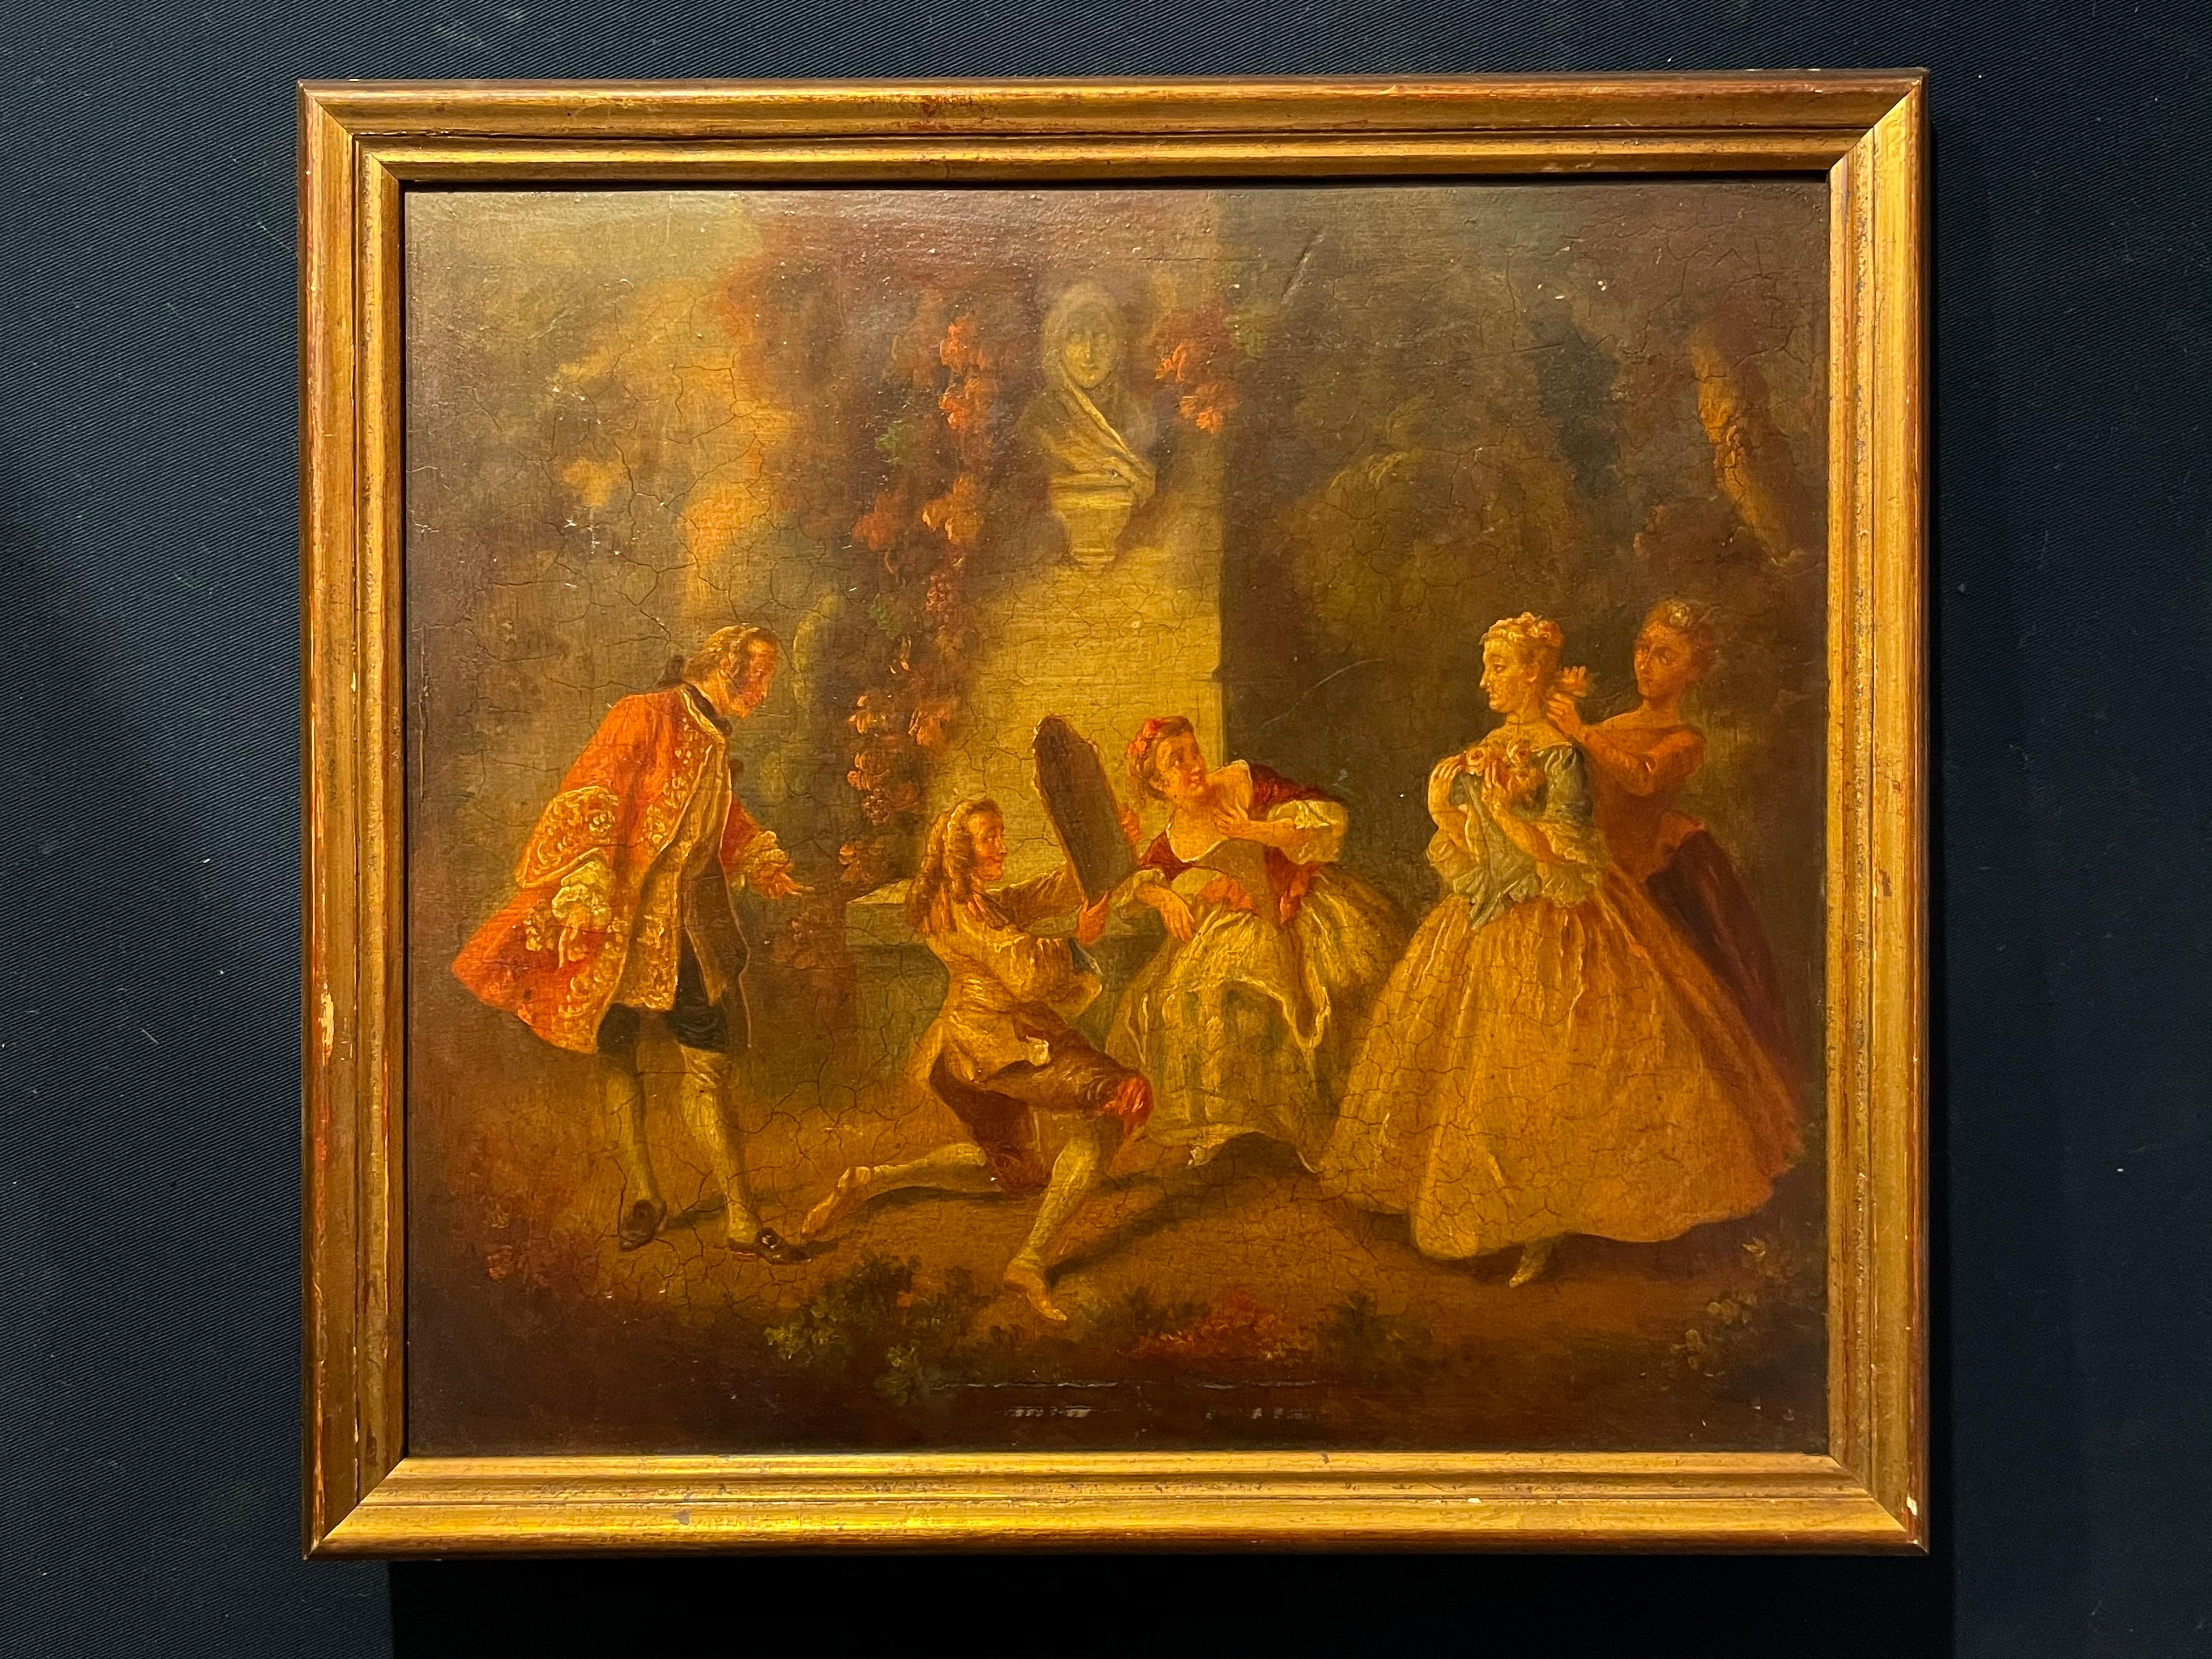 18th CENTURY FRENCH ROCOCO OIL ON WOOD PANEL - ELEGANT FIGURES IN PARKLAND - Painting by Unknown